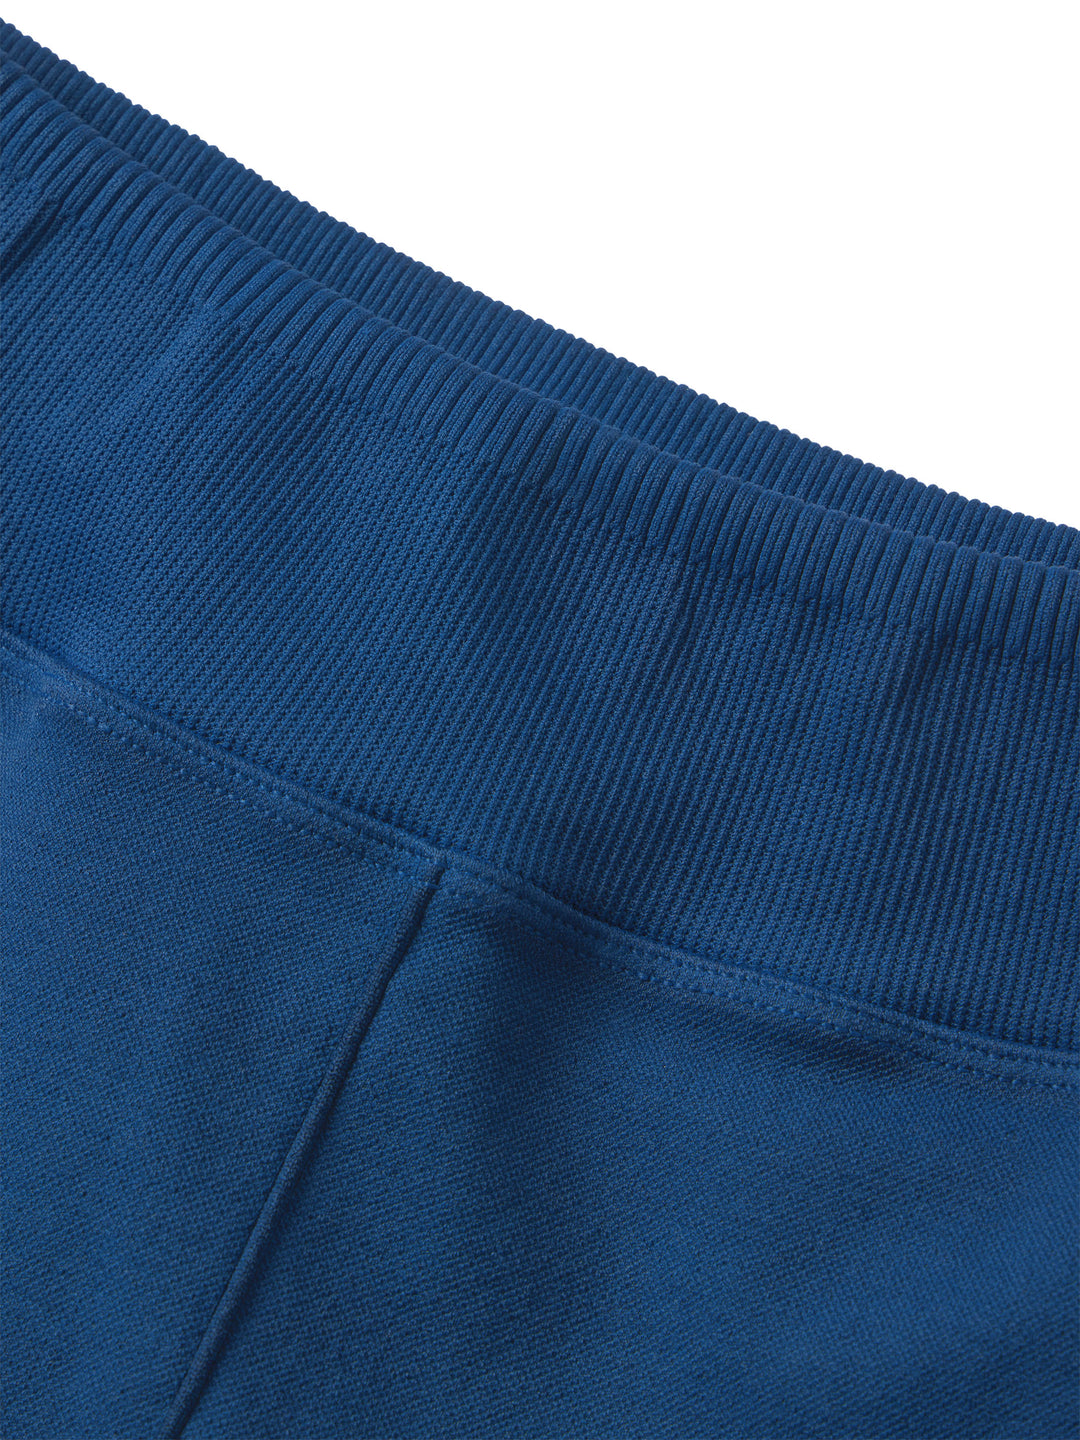 Close-up of the astral blue PB5star 7/8 seamless compression leggings' high-waist band for pickleball players.